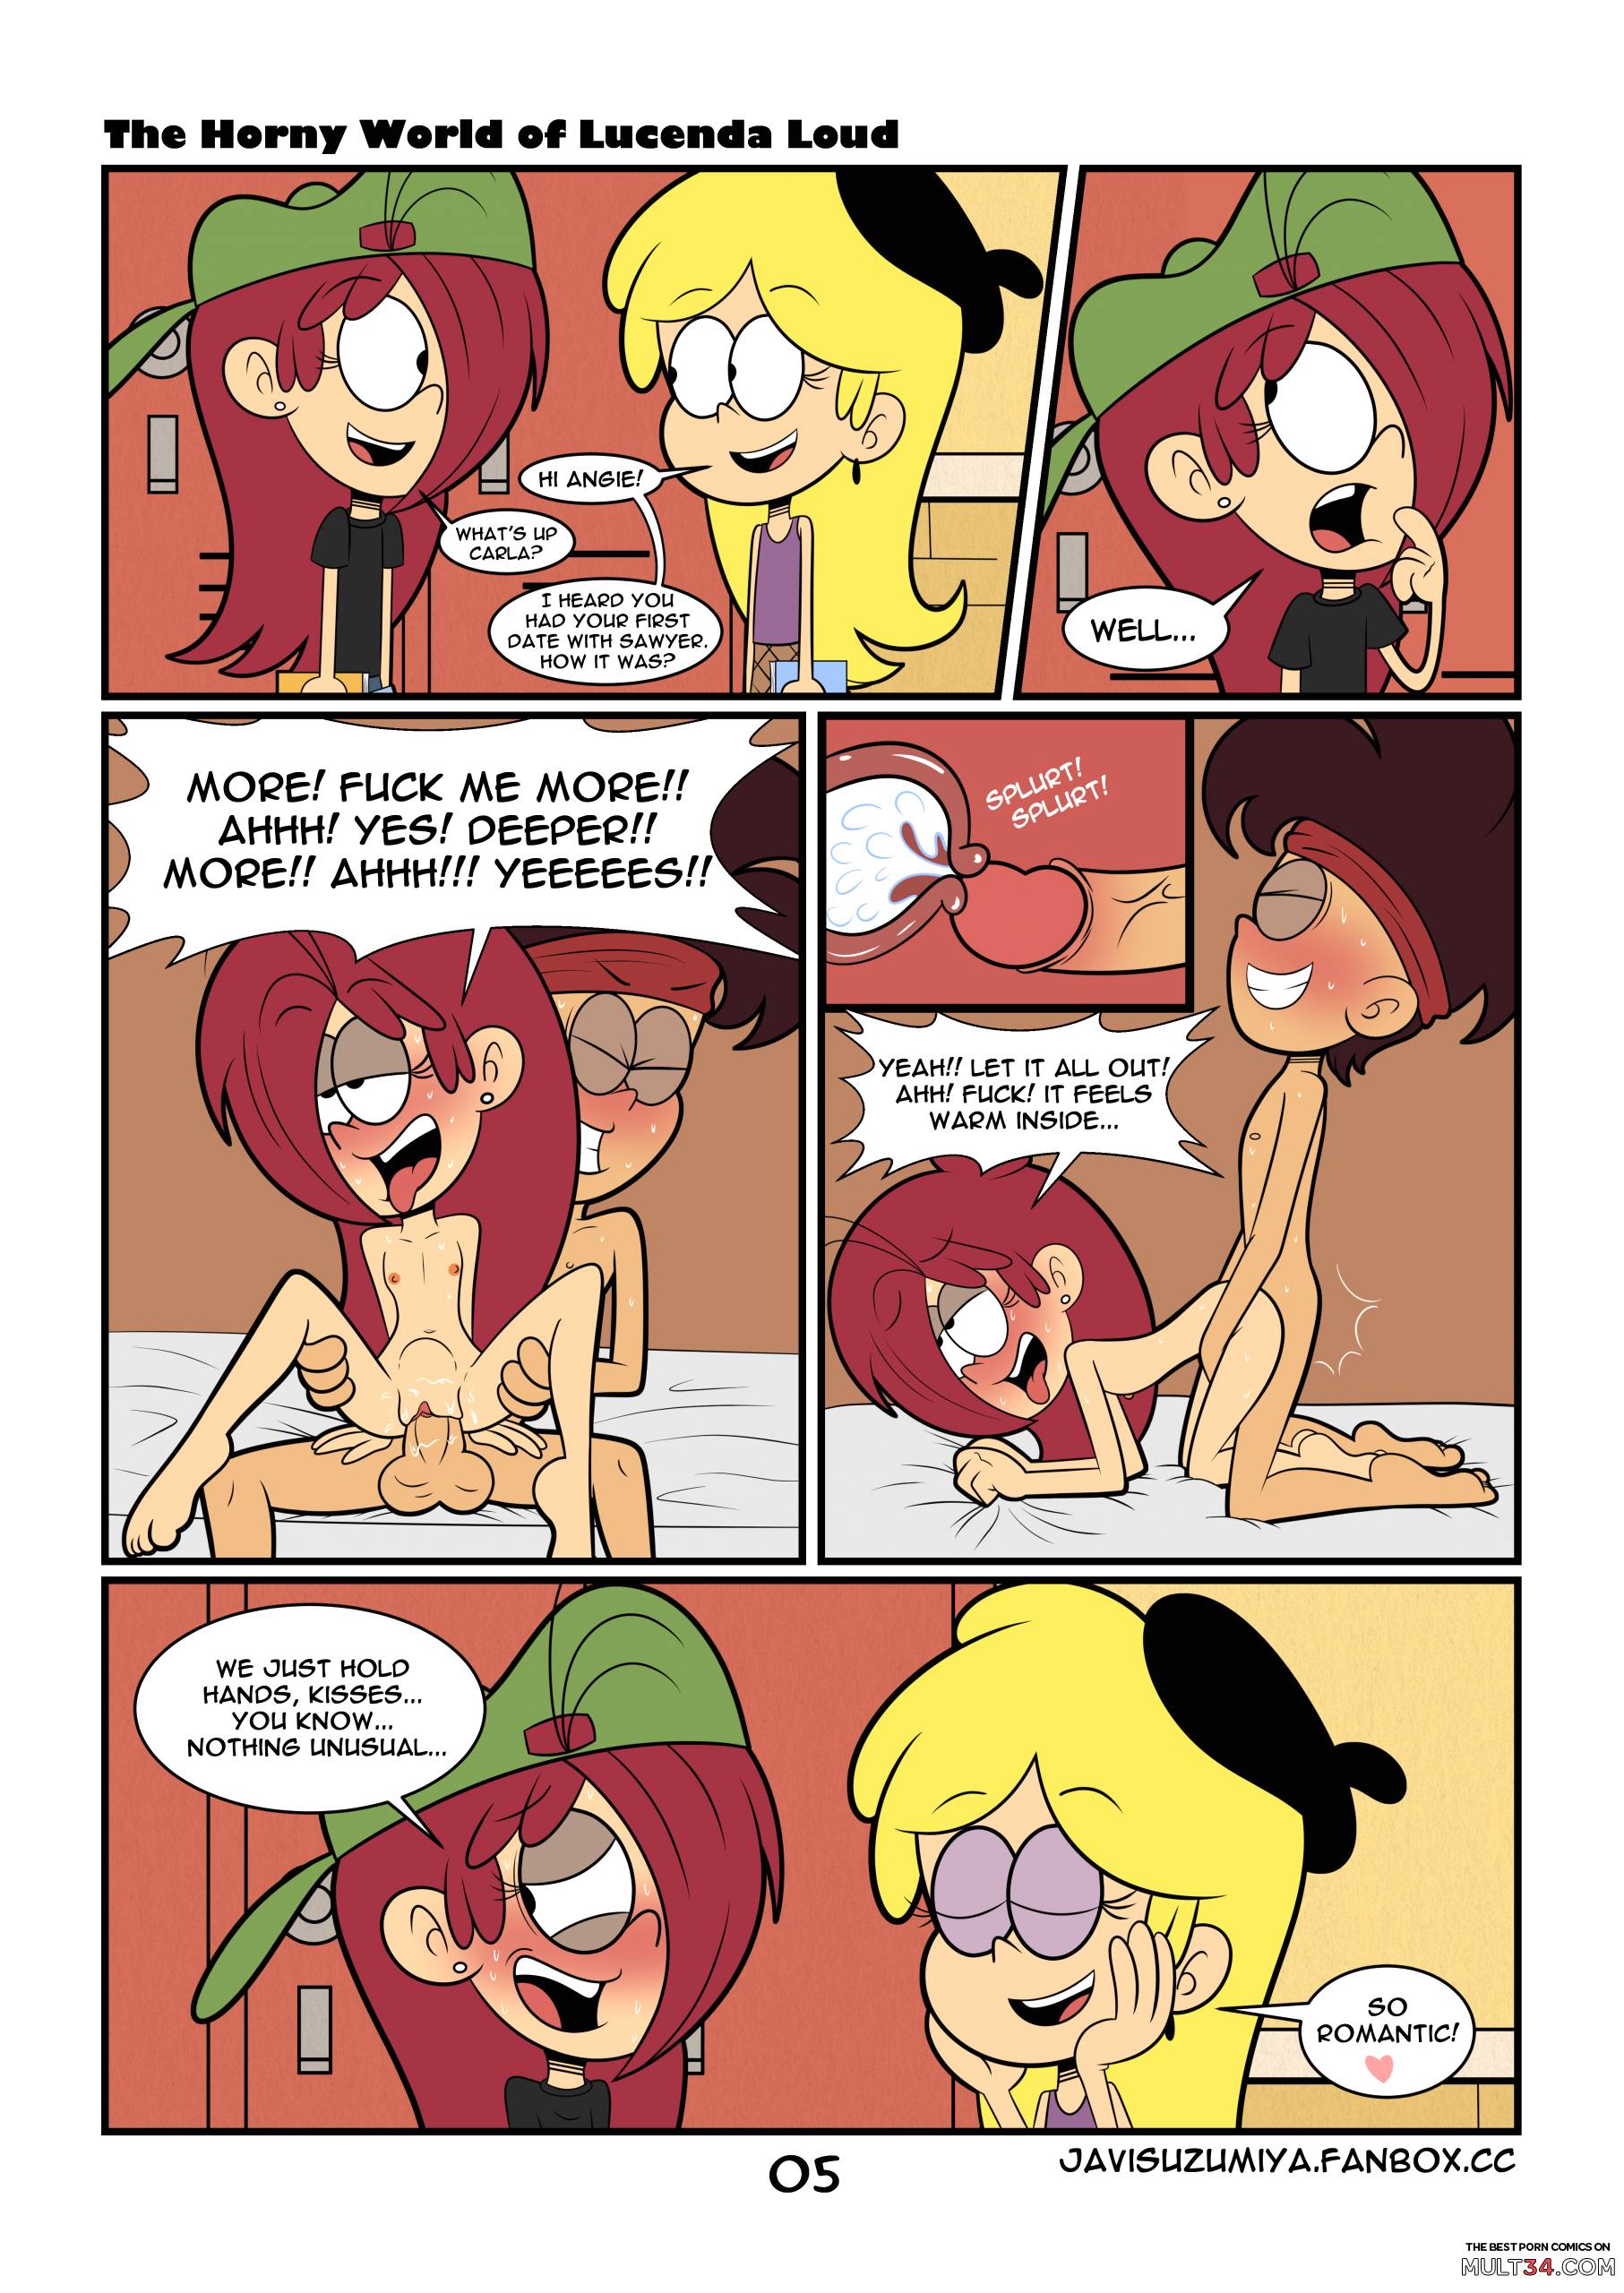 The Horny World of Lucenda Loud page 5